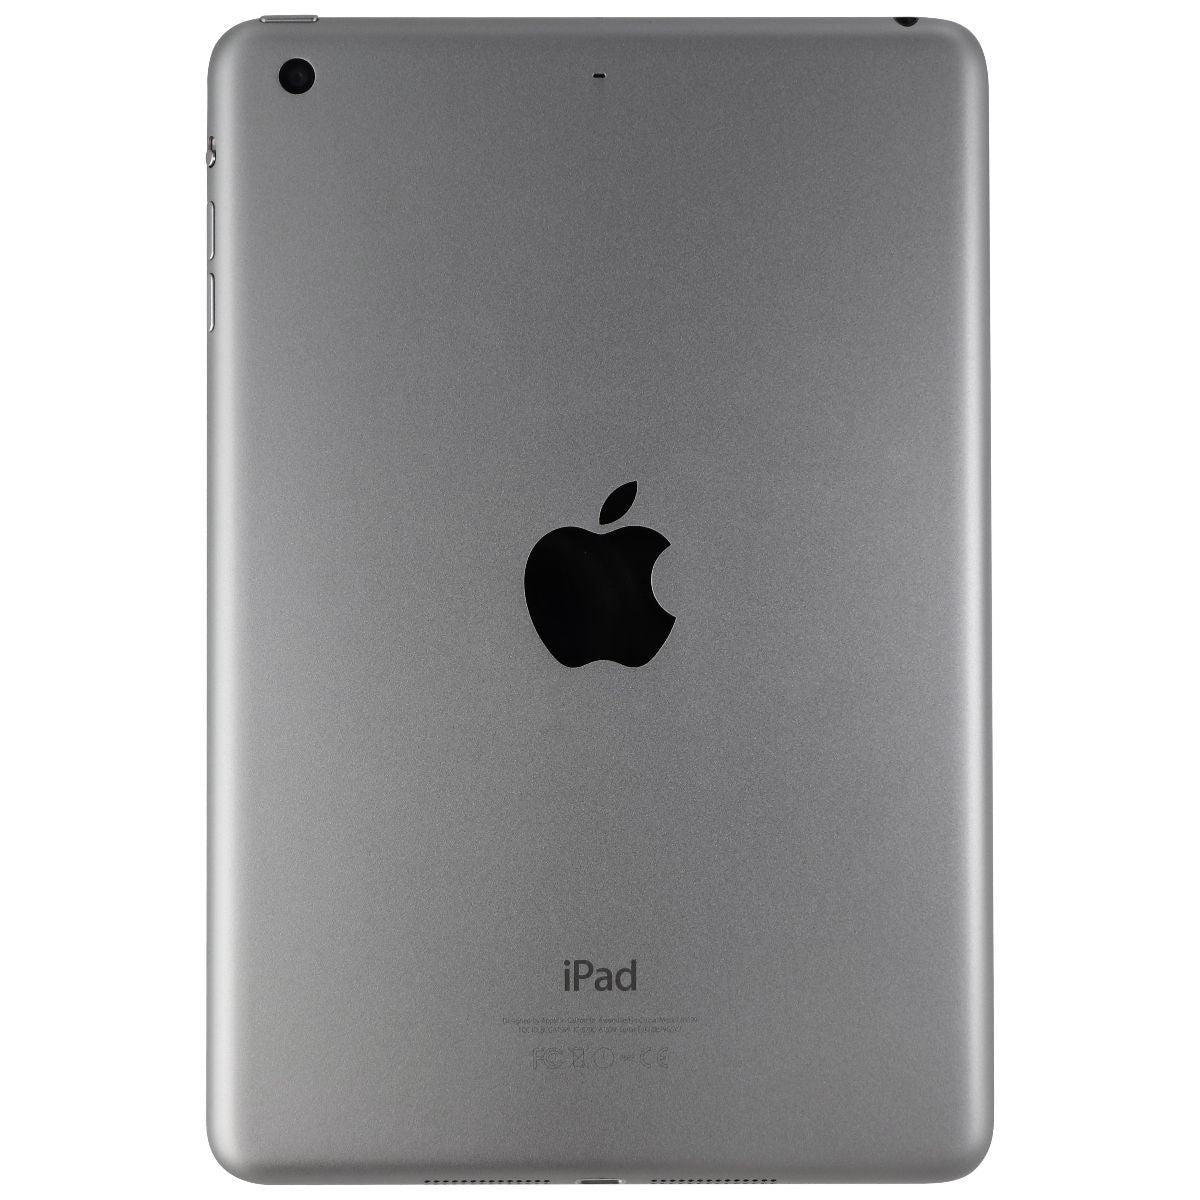 Apple iPad mini 3 (7.9-inch) Tablet (A1599) Wi-Fi Only - 128GB / Space Gray iPads, Tablets & eBook Readers Apple    - Simple Cell Bulk Wholesale Pricing - USA Seller